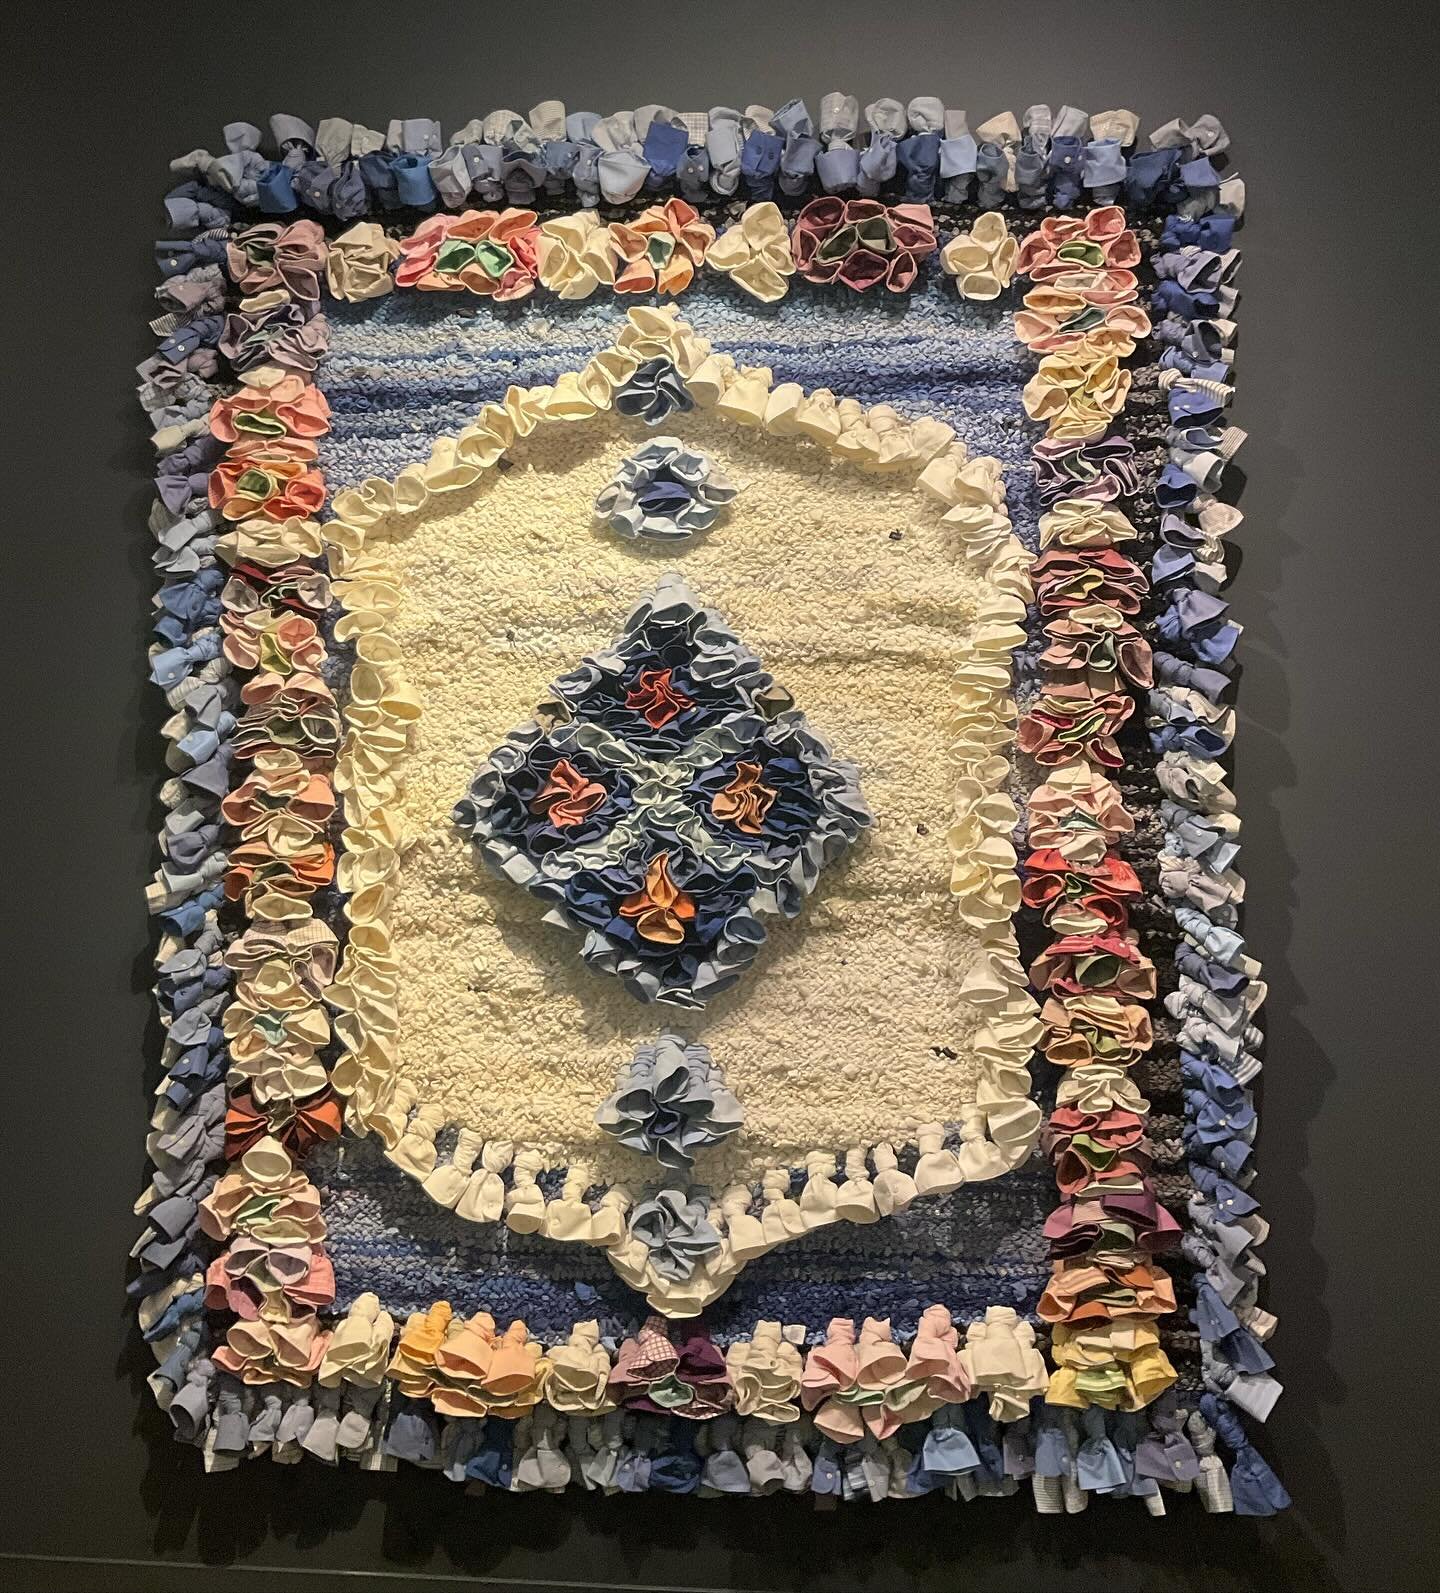 From fabric to frame, we handle it all with finesse! Our friends @sjmqt uplifting artists one textile at a time. 

#sanjosemuseumofquiltsandtextiles #sanjoseartist #sanfrancisco #sanfranciscoartgallery #arthandling